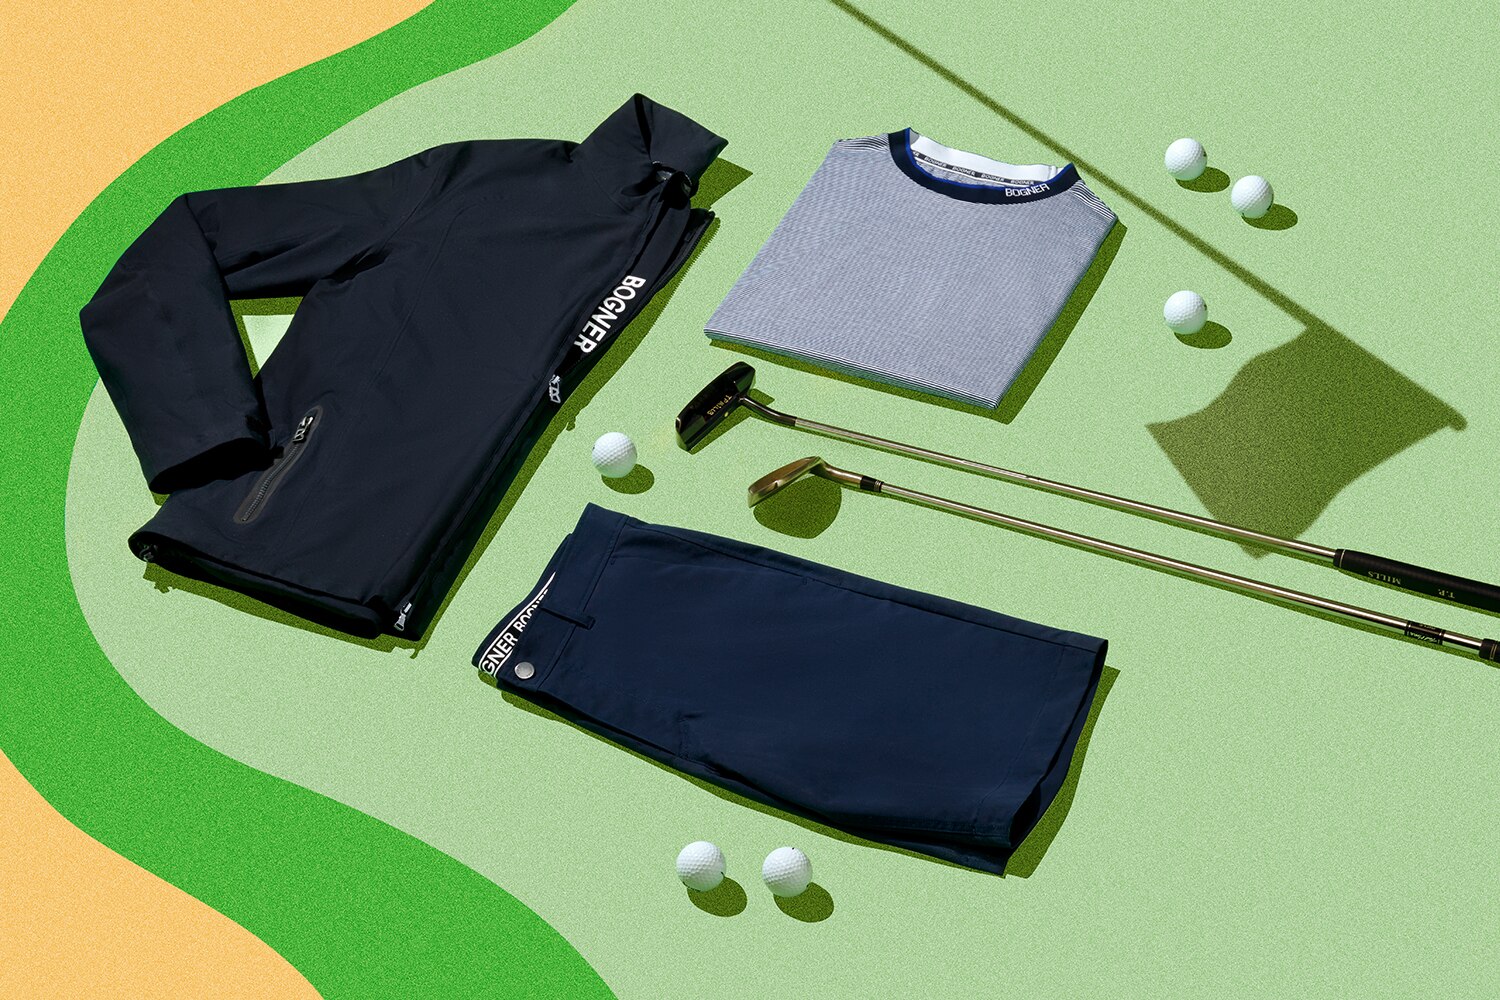 Partnership: How To Bring Your Golf Gear Up To Par With Bogner | The  Journal | MR PORTER